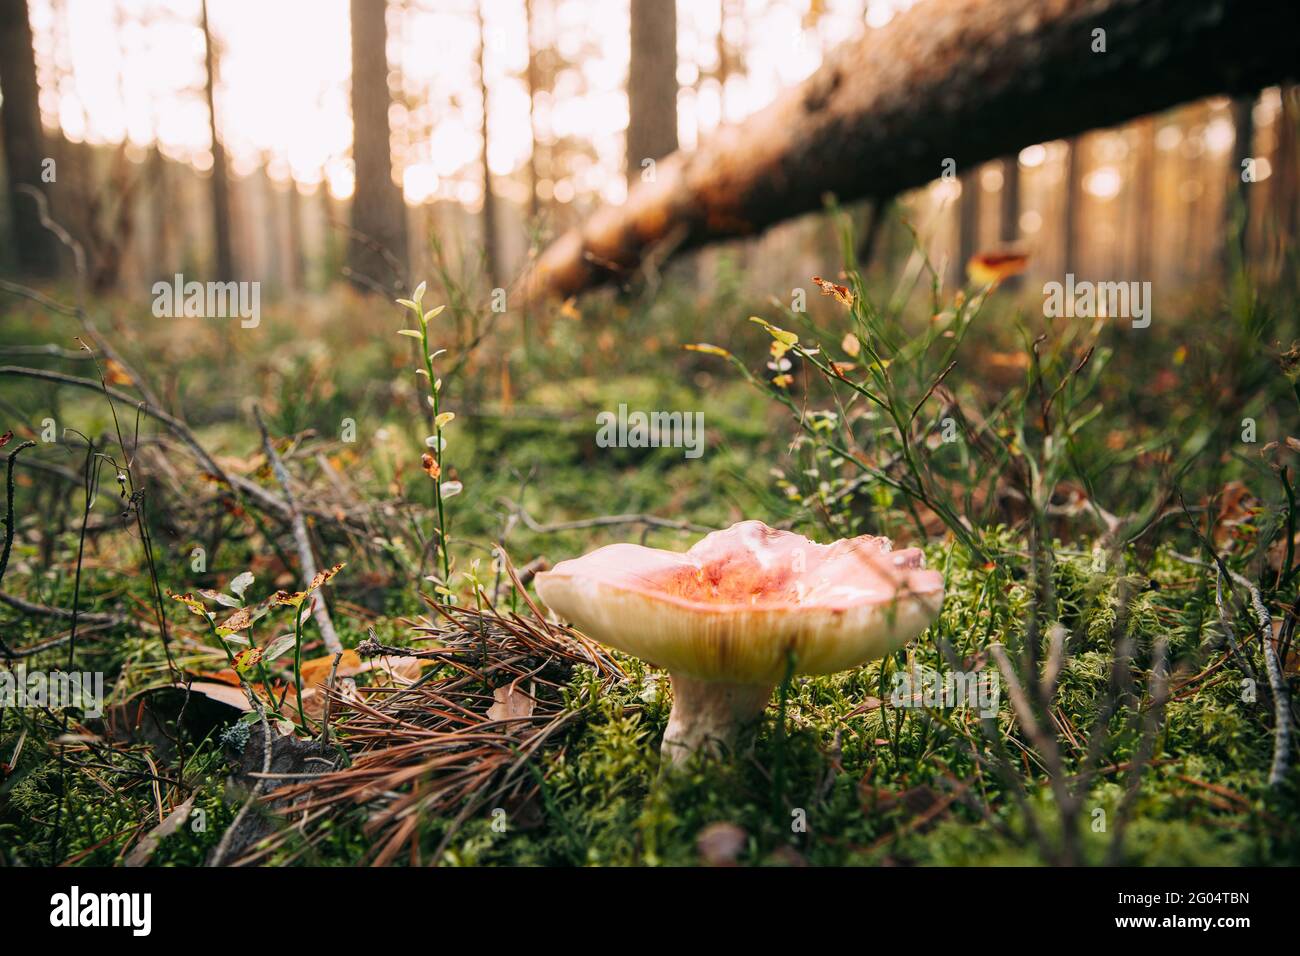 Russula Mushroom Growing Among Fallen Tree Pine In Autumn Forest Stock Photo